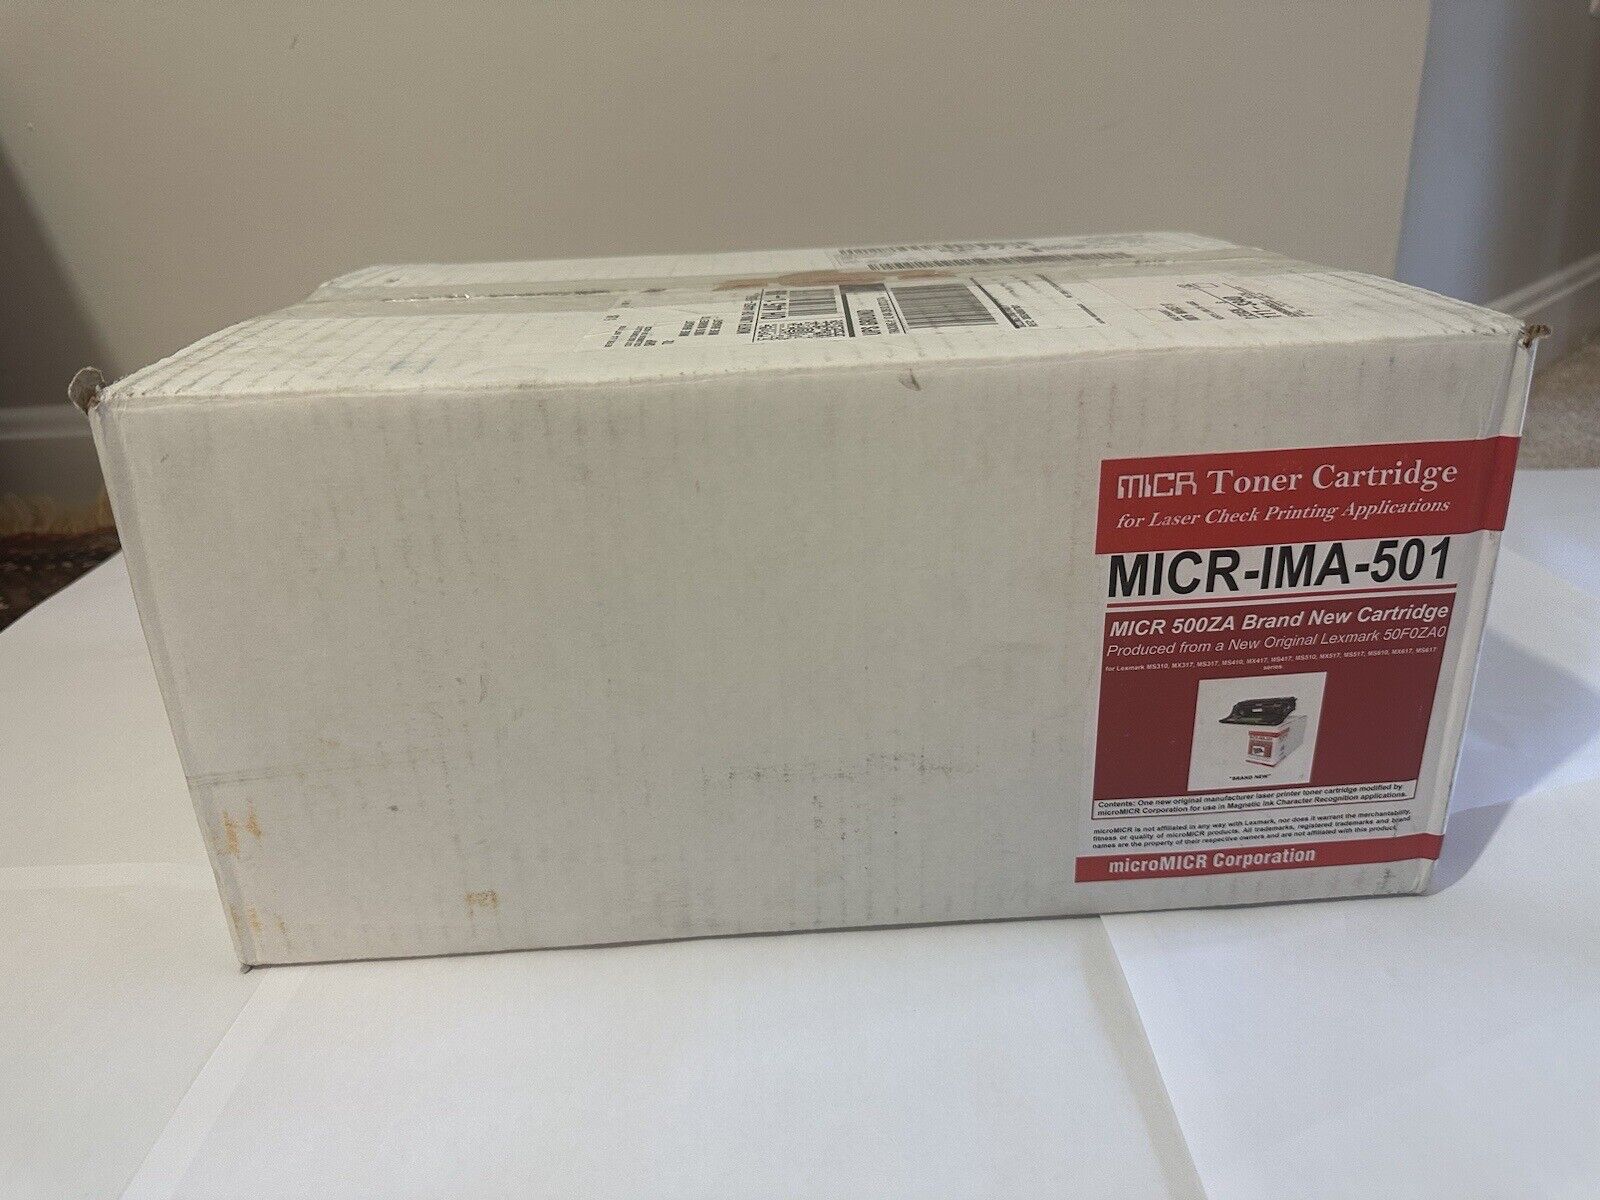 Micromicr Ima501 Imaging Unit-1Pack (micrima501) for Lexmark,MS310,MX317,and +